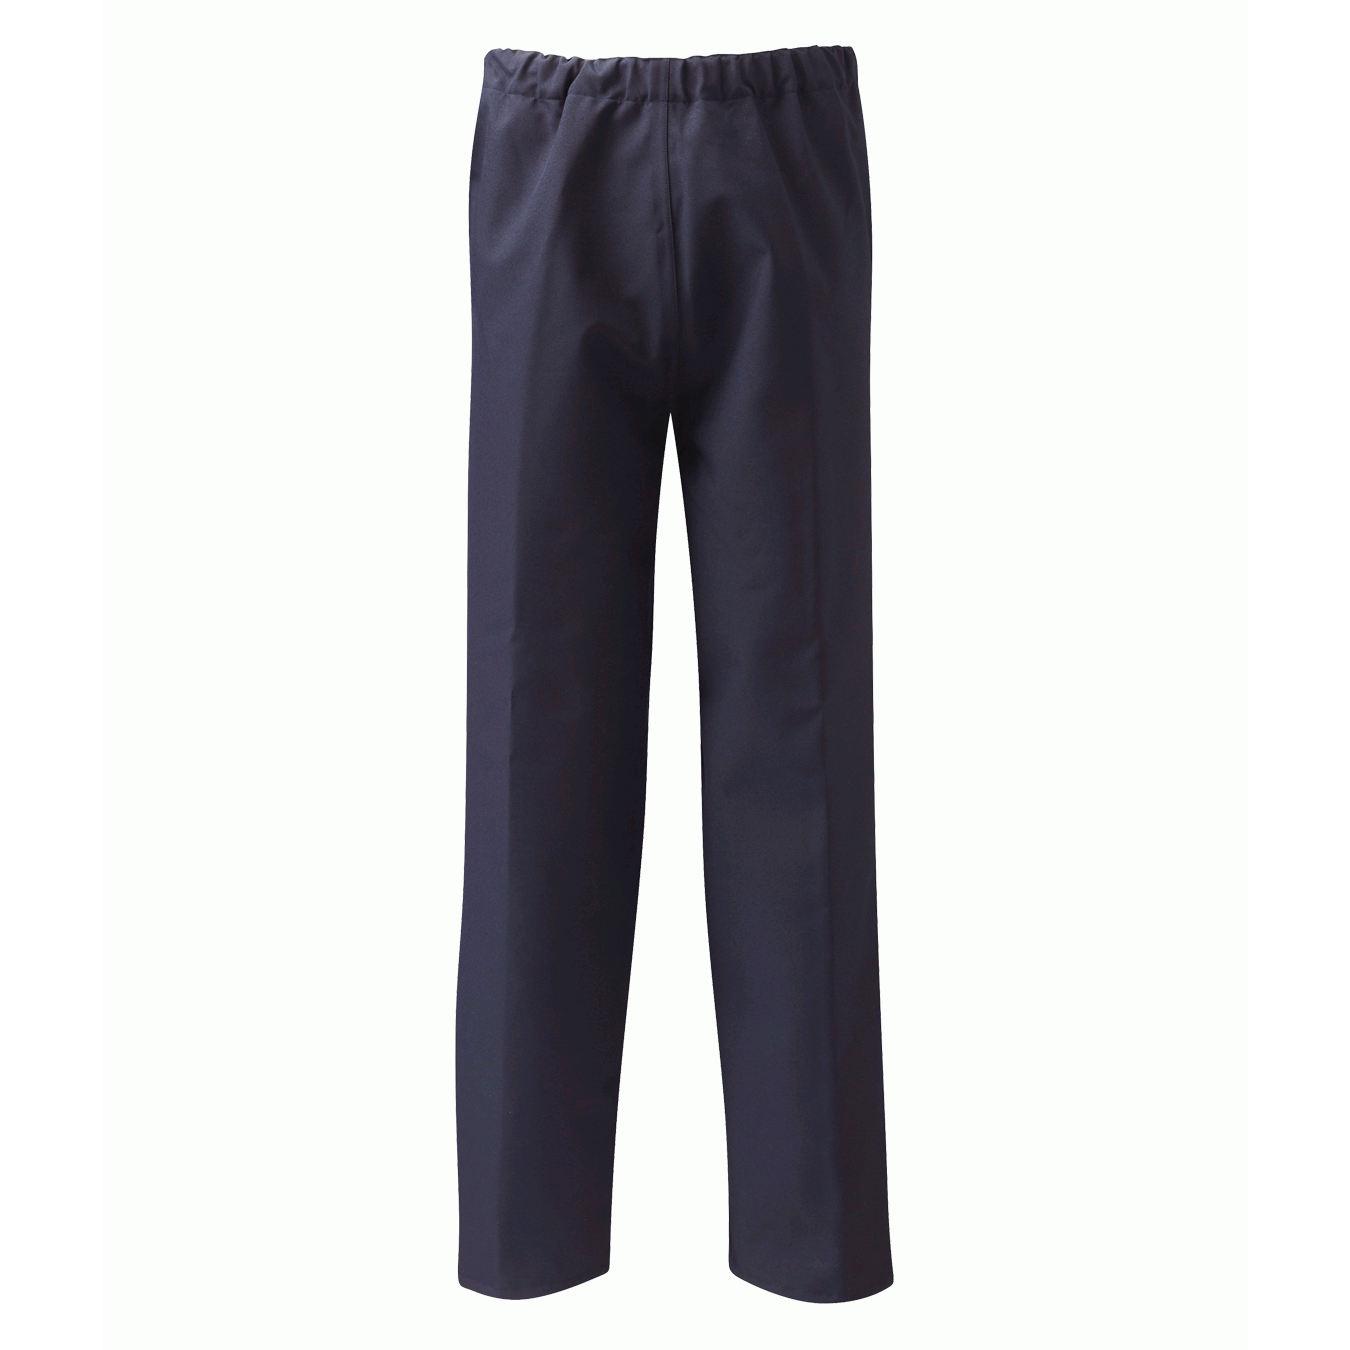 EBRO: 2 LAYER LINED GORE-TEX® TROUSERS